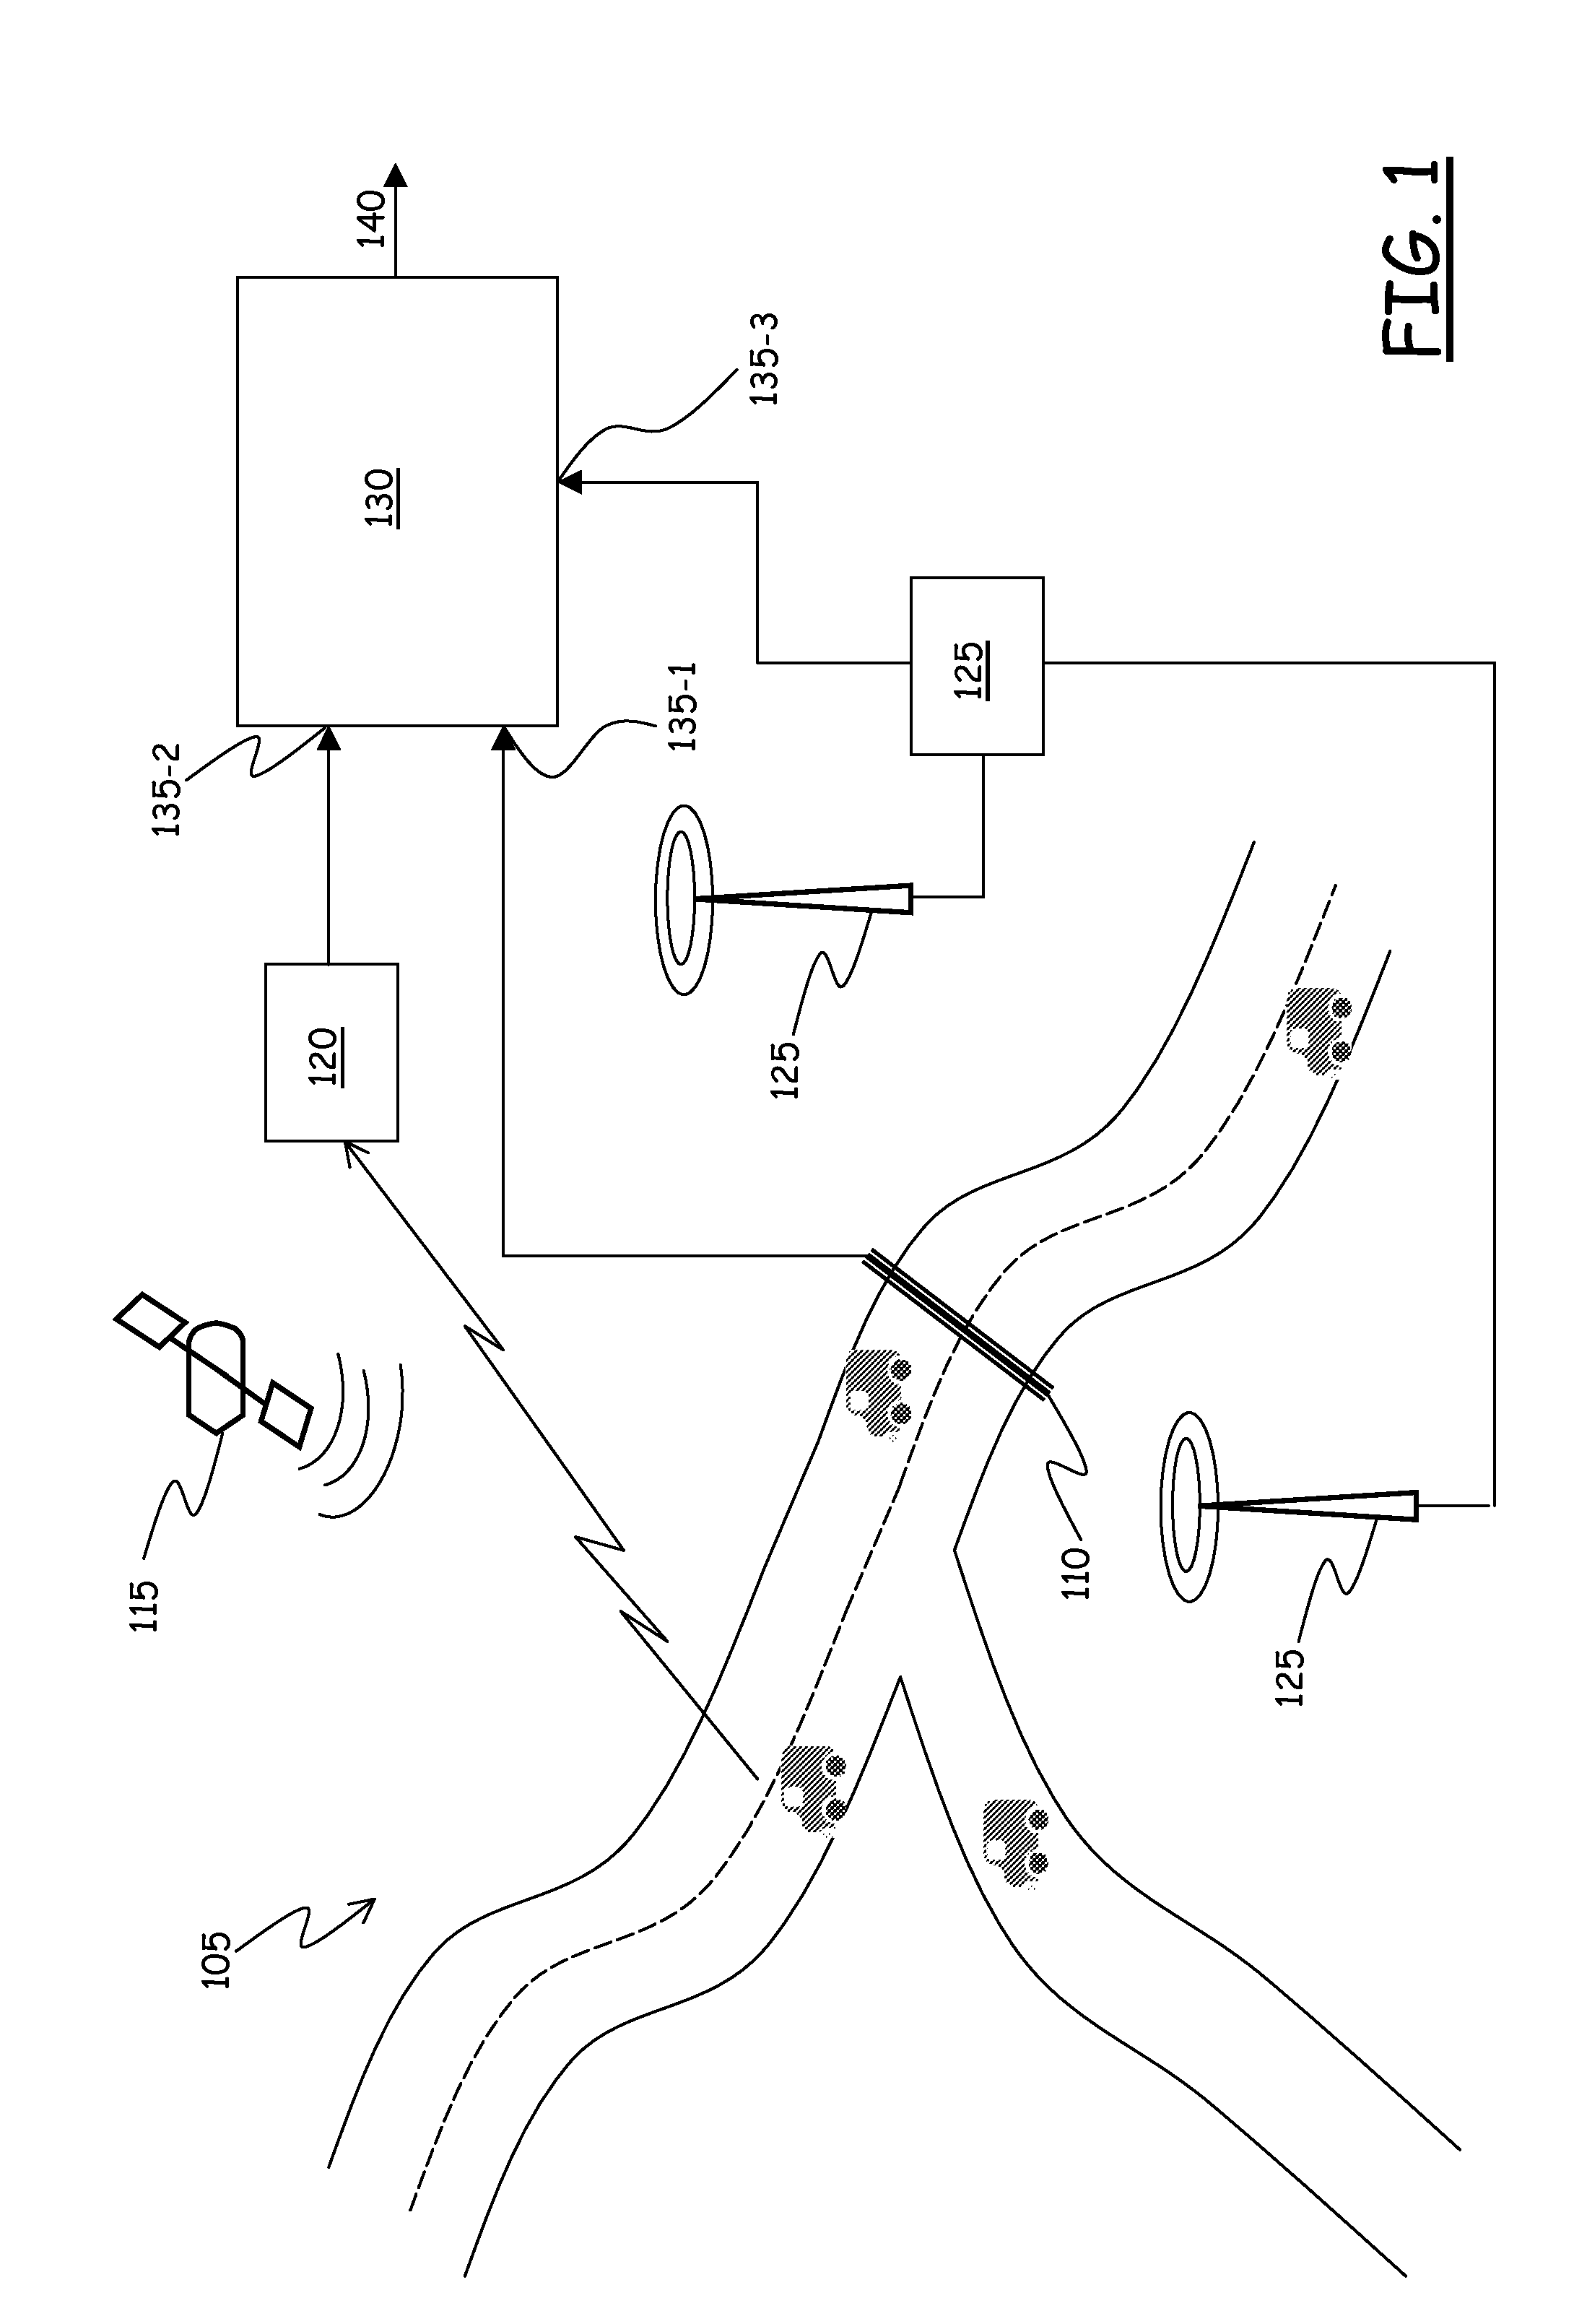 Method and system for estimating road traffic